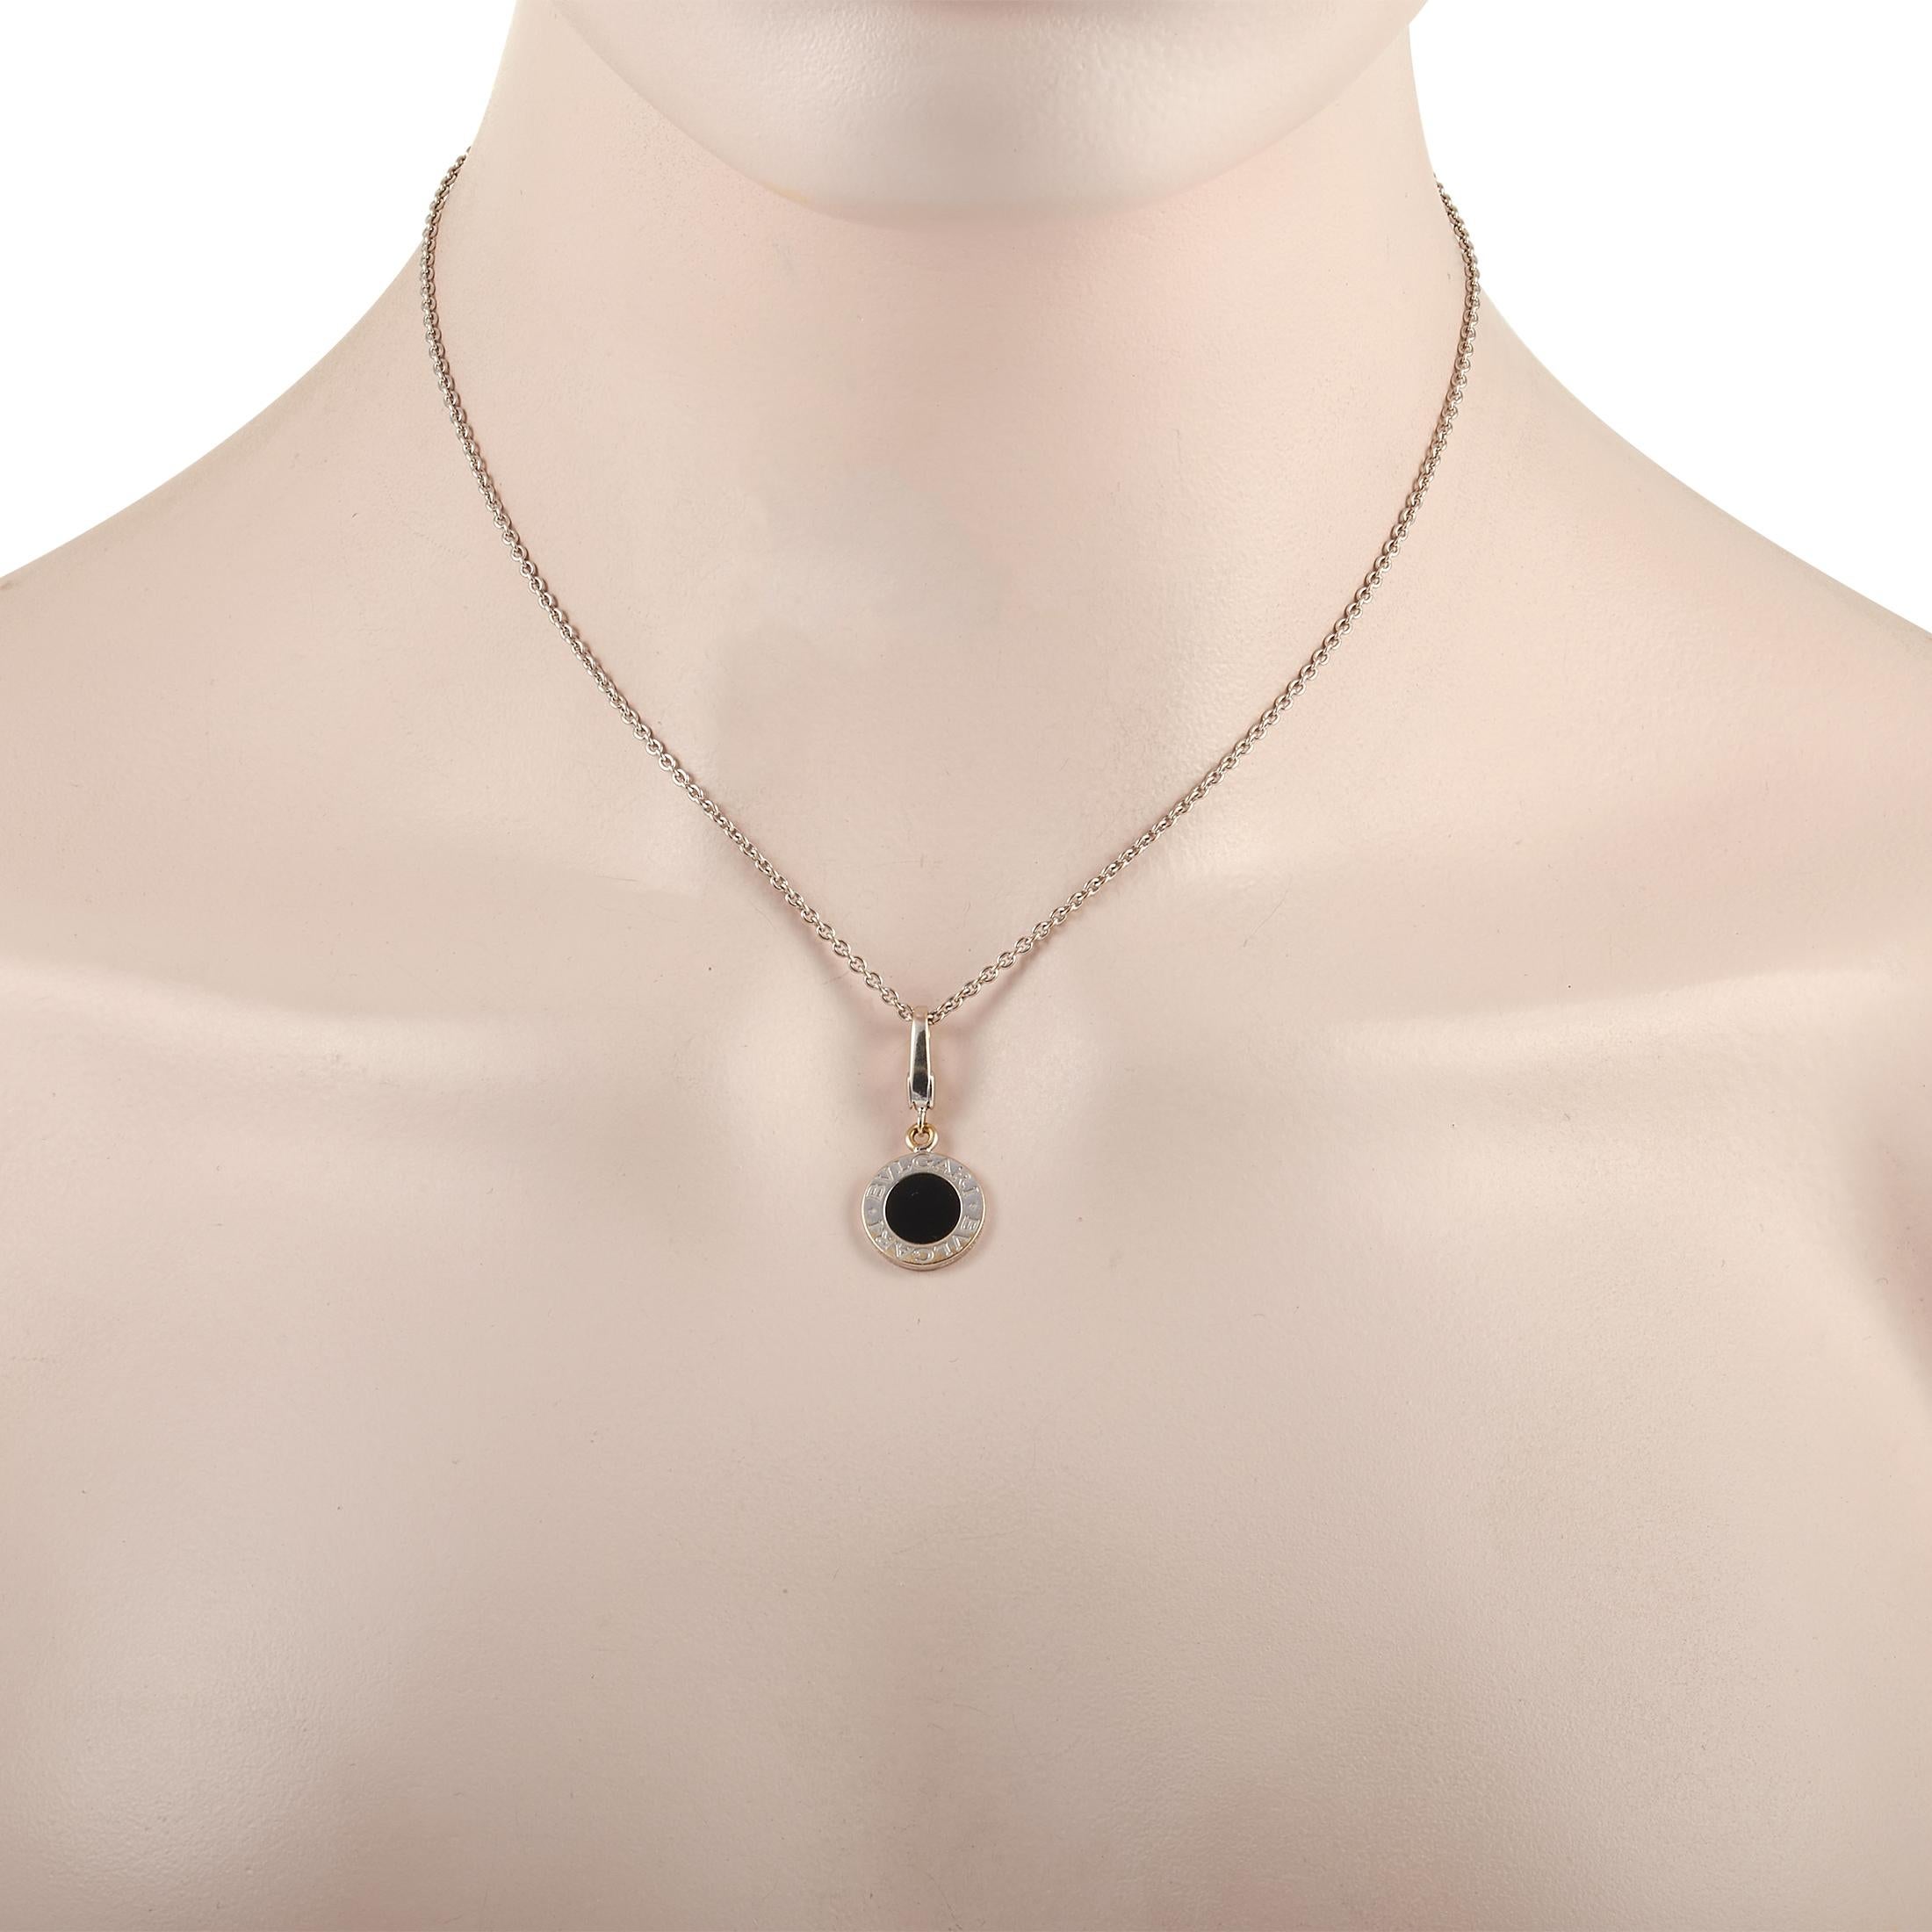 This classic Bvlgari necklace isn’t shy about name-dropping. The necklace is made with an 18K white gold chain measuring 18 inches in length and features a round 18K white gold set with a sleek onyx gemstone. The outer white gold disc bears the